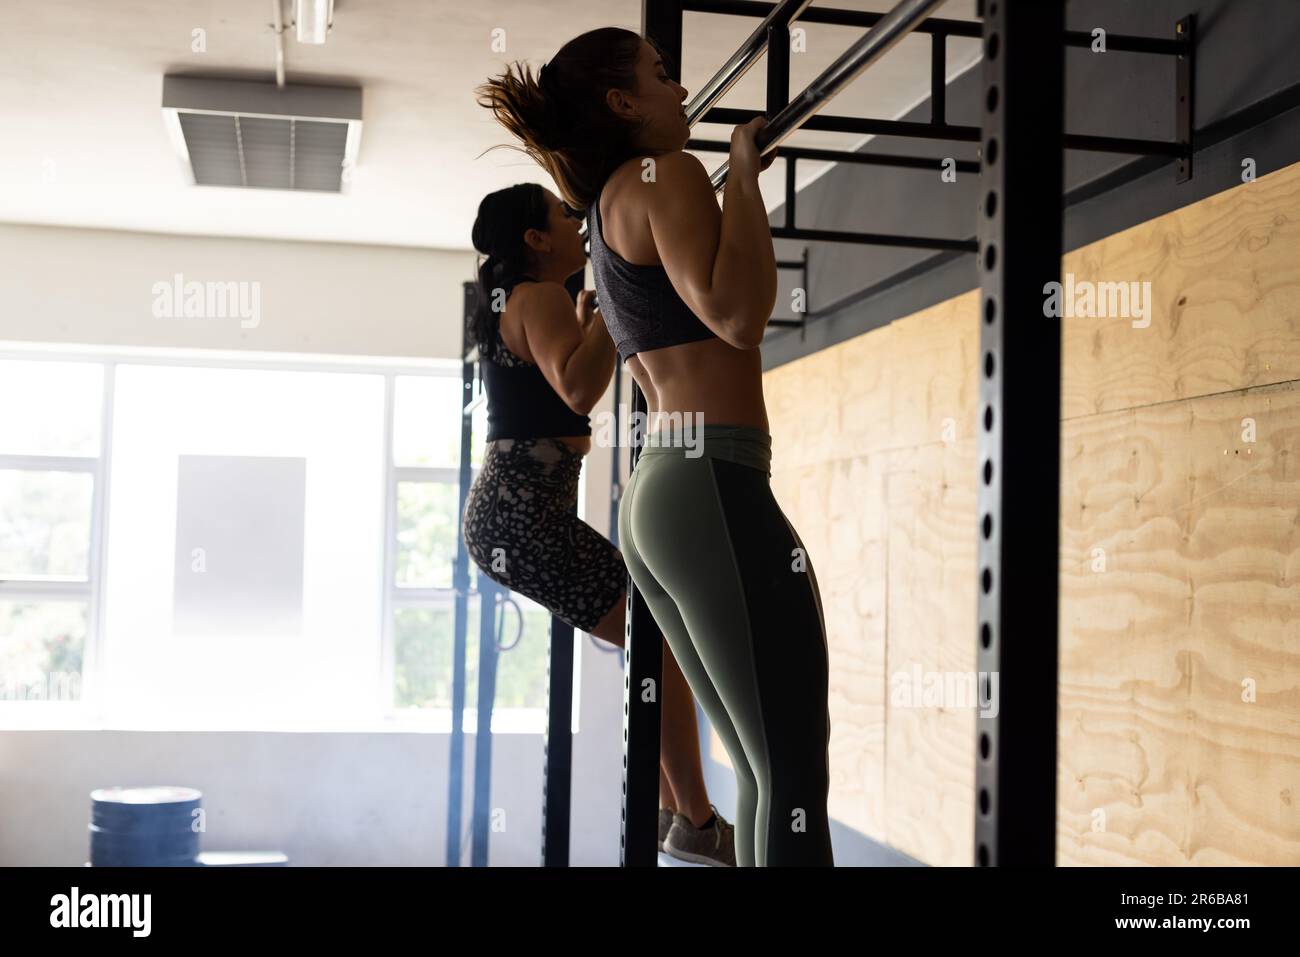 Side view of caucasian young women practicing chin-ups on gymnastics bar in health club, copy space Stock Photo